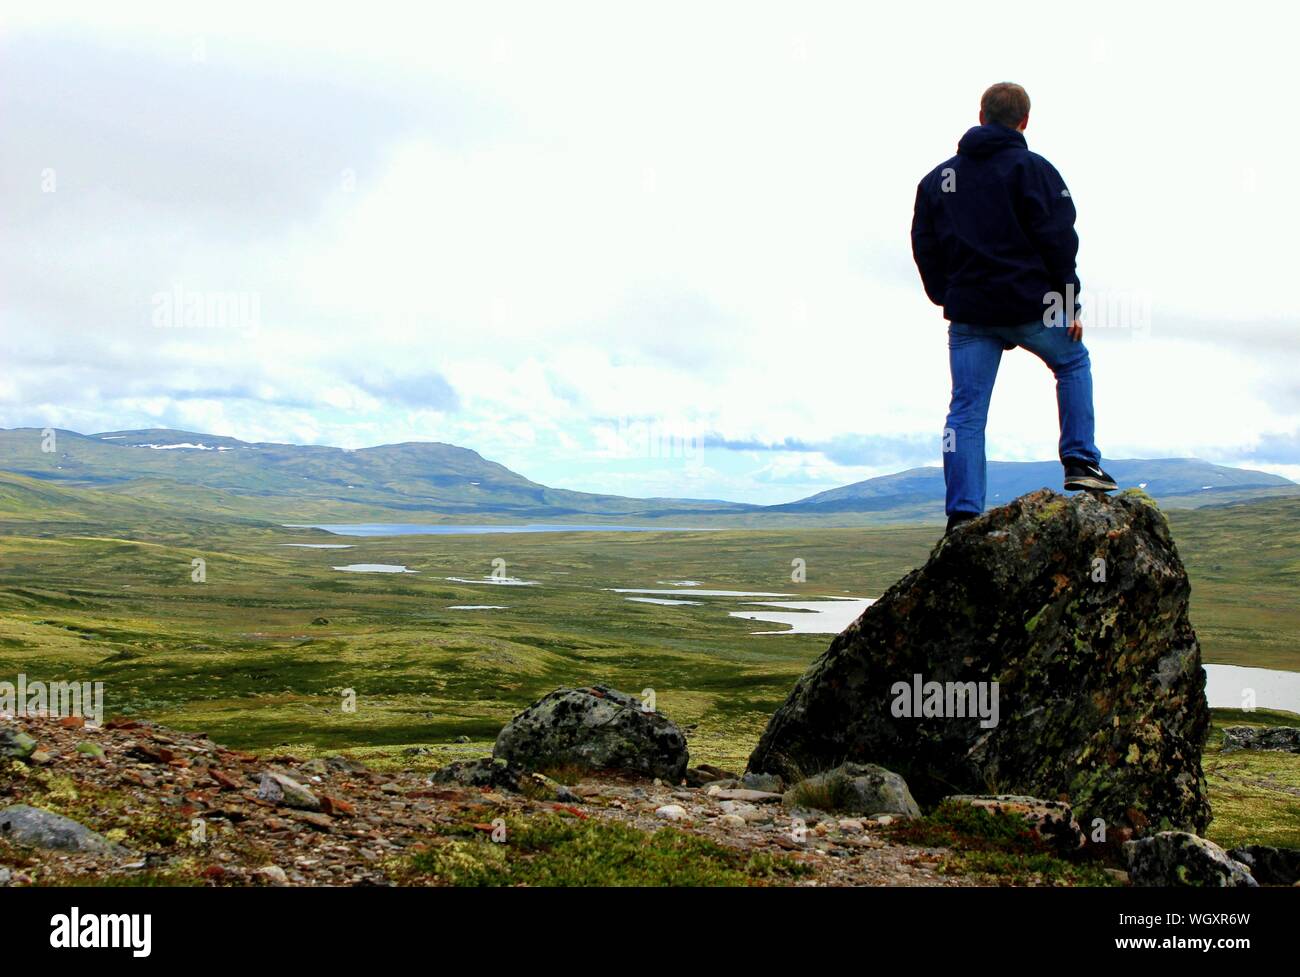 Full Length Rear View Of Man Standing On Rock Watching Landscape Stock Photo